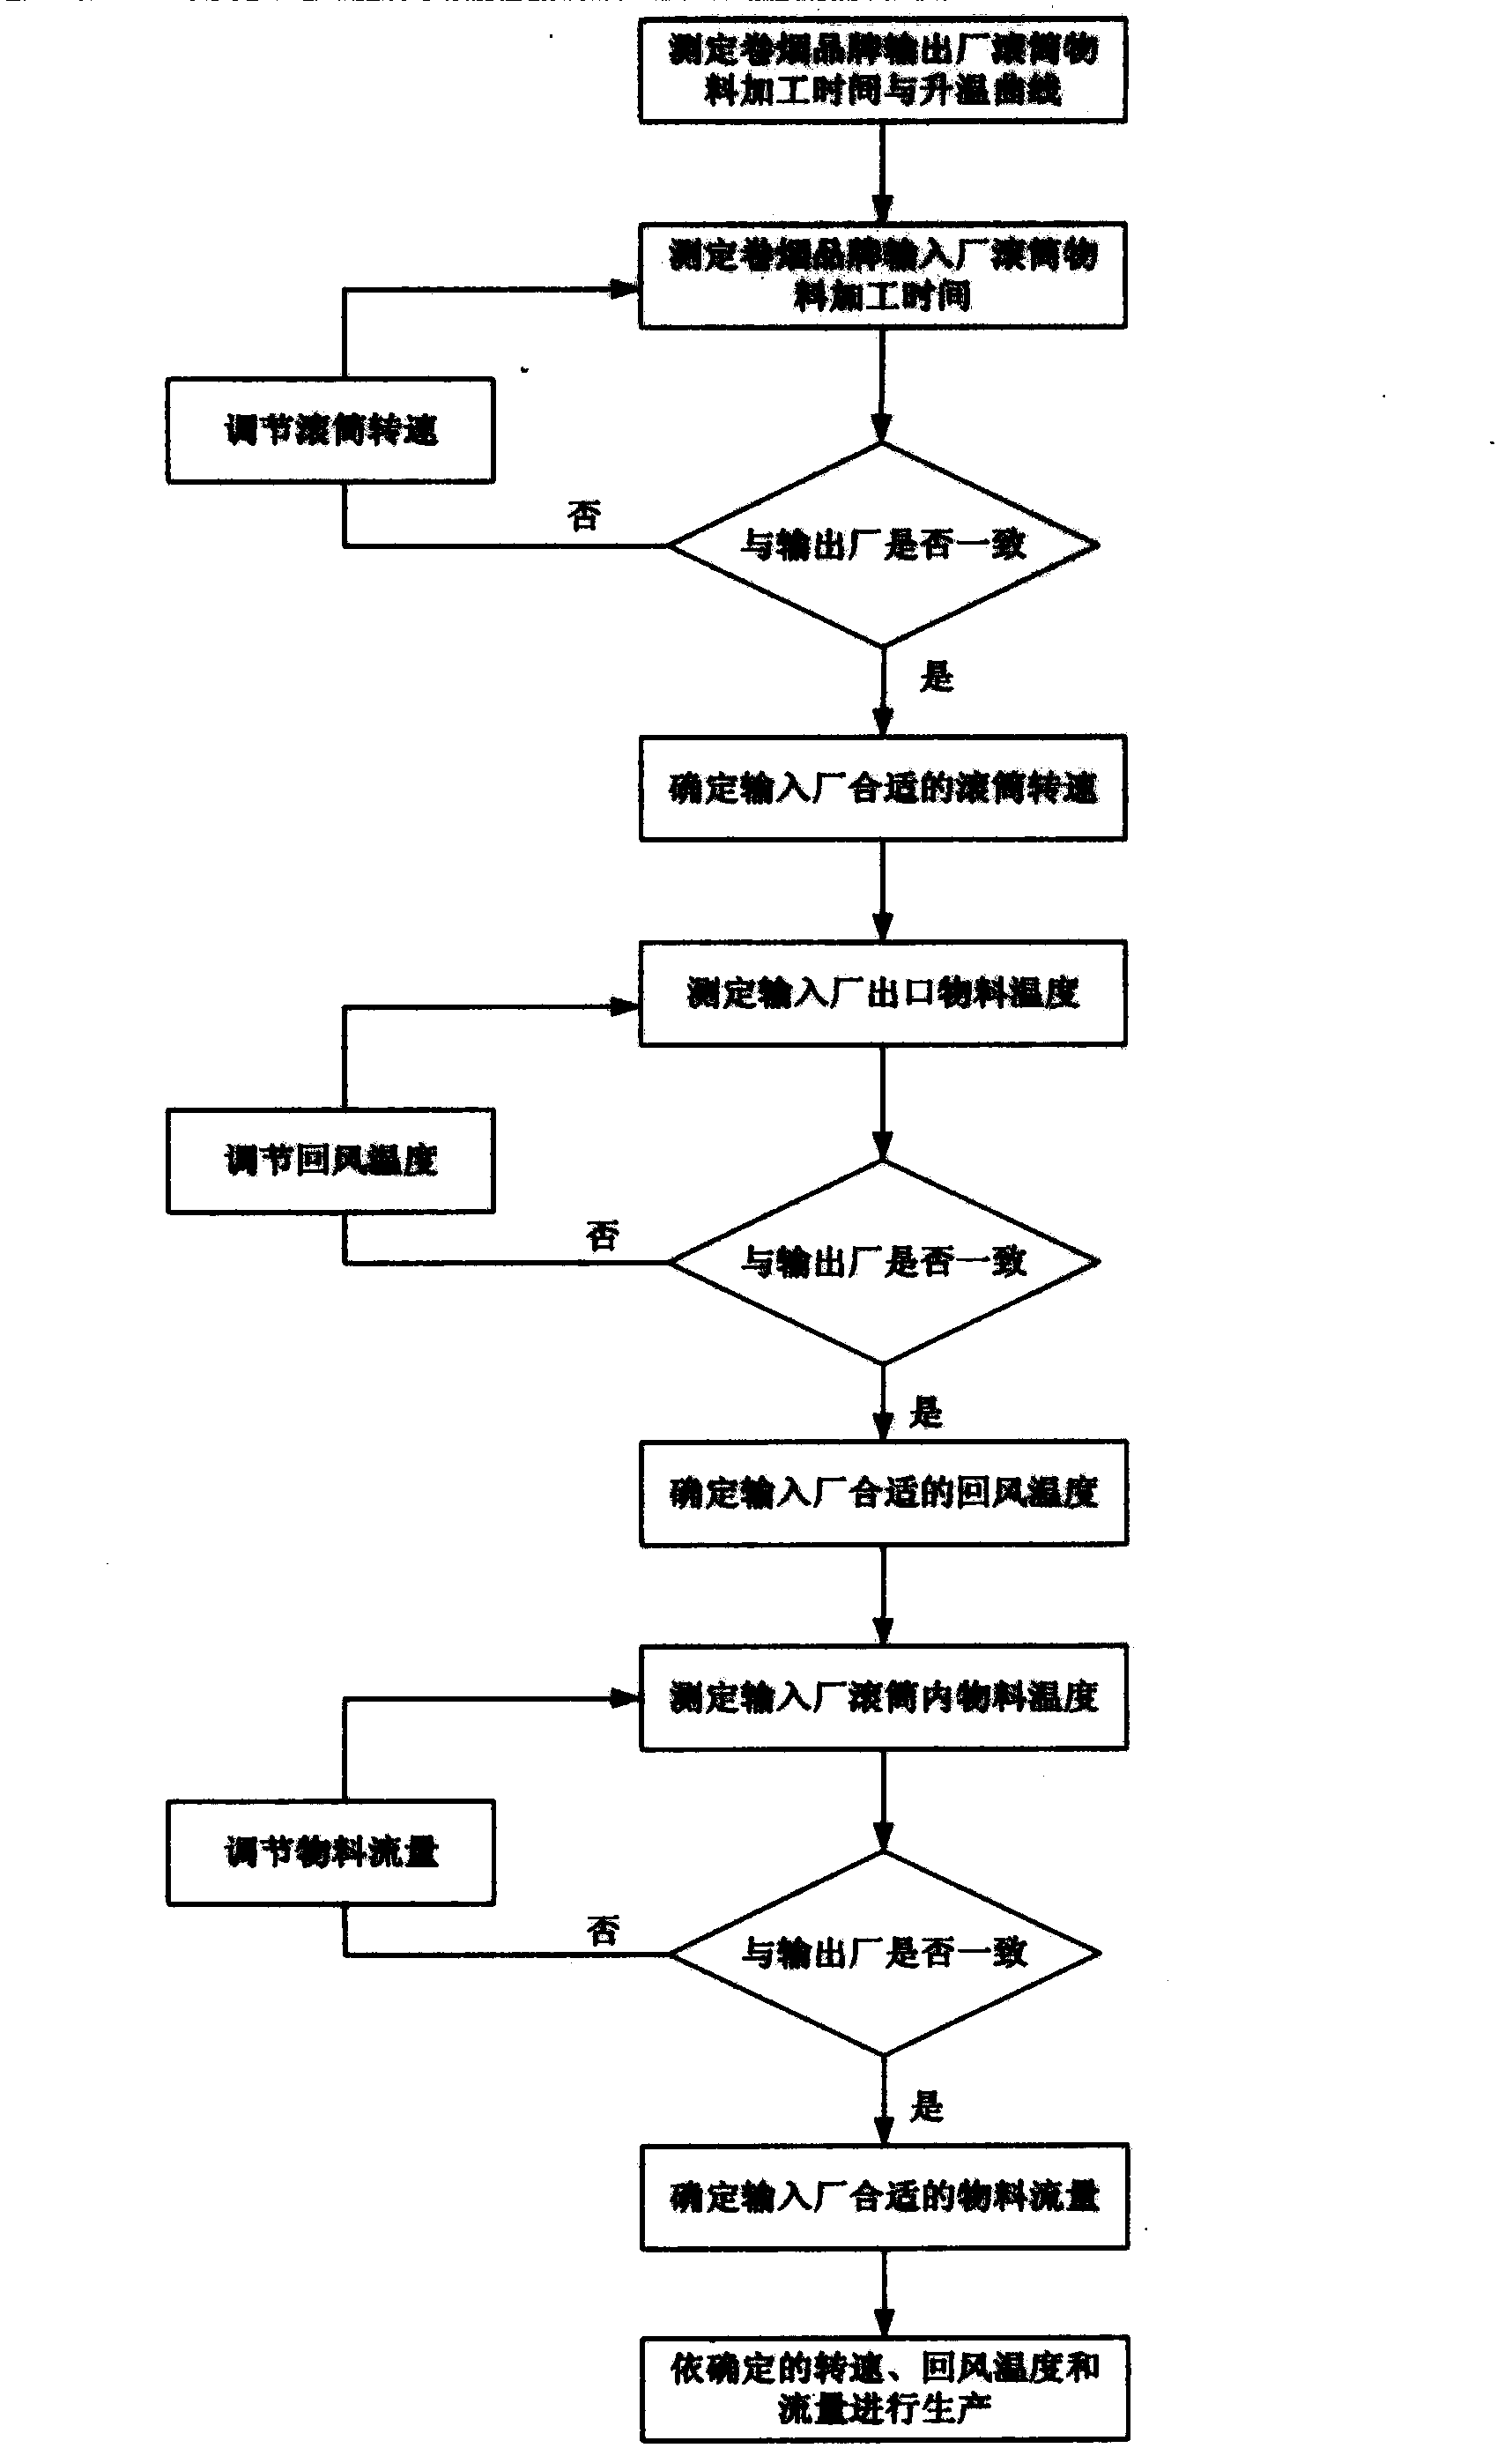 Method for controlling consistency of processing quality in heating processes of tobacco shred processing rollers